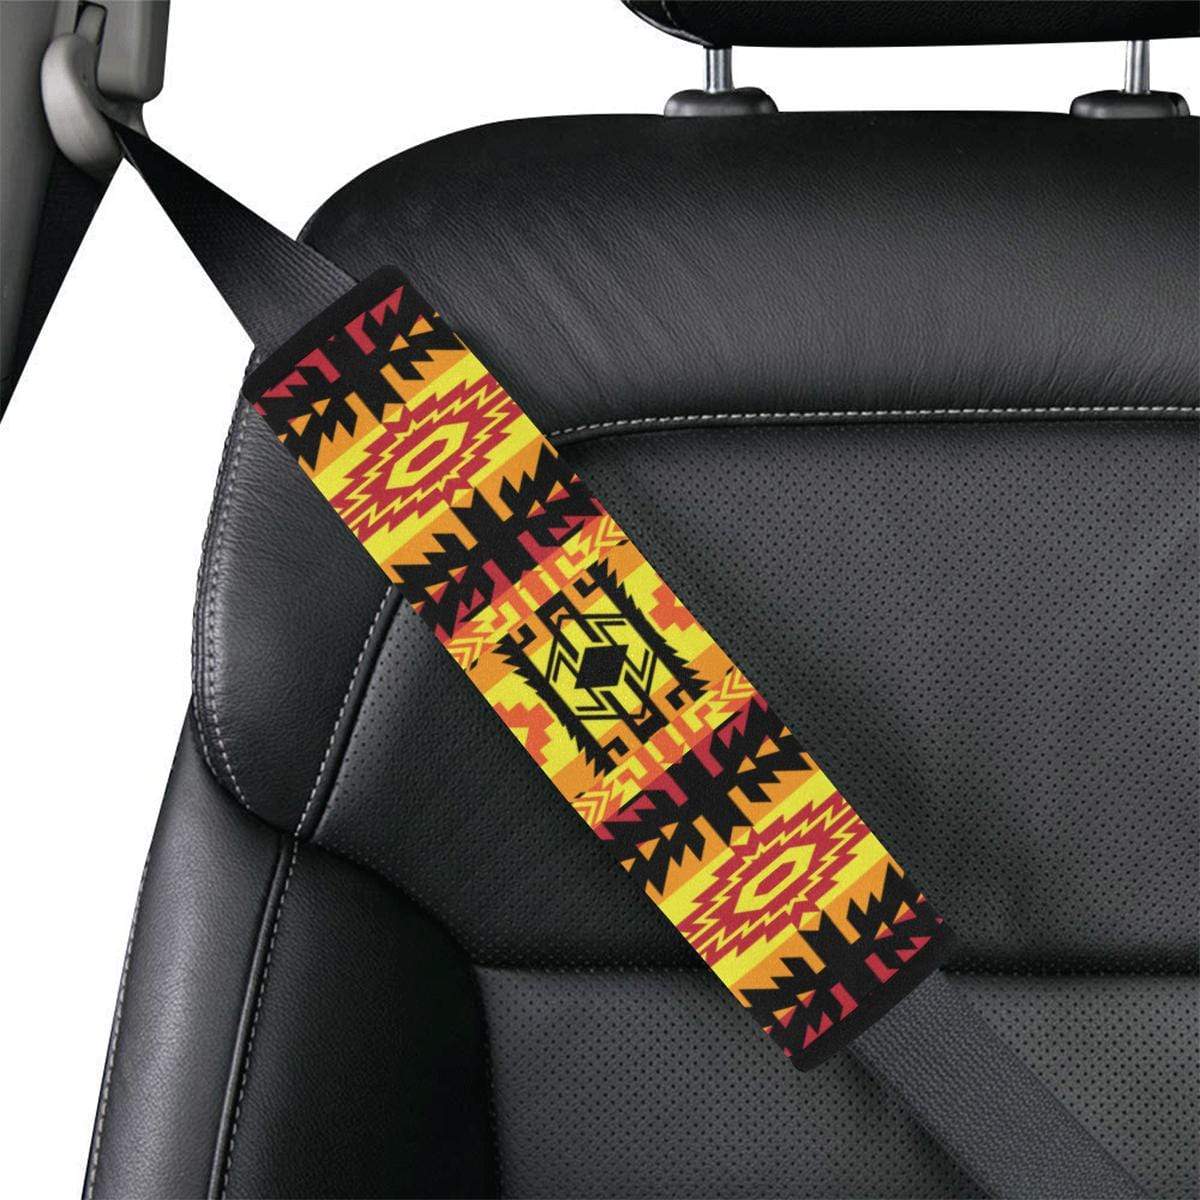 Journey of Generations Car Seat Belt Cover 7''x12.6'' Car Seat Belt Cover 7''x12.6'' e-joyer 